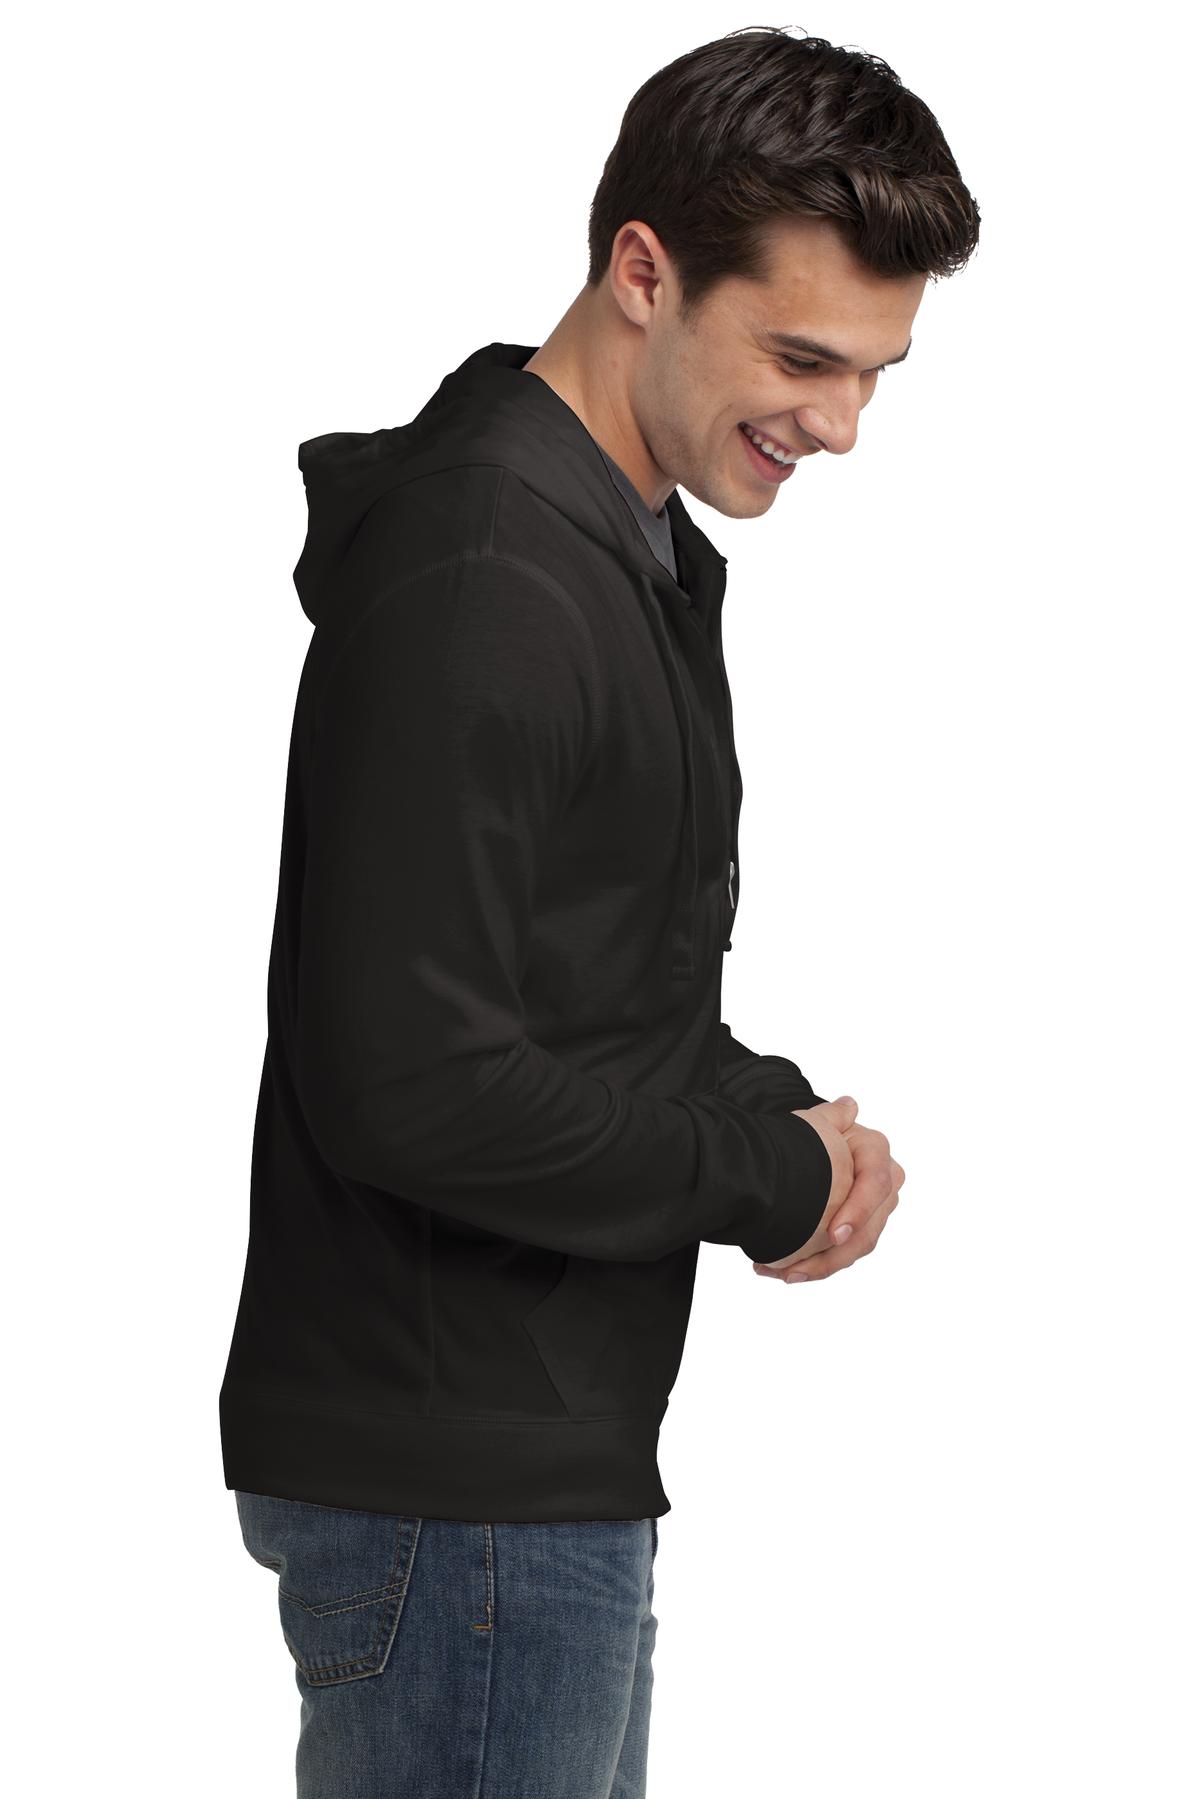 District Young Mens Jersey Full Zip Hoodie-3XL (Black) - image 3 of 6